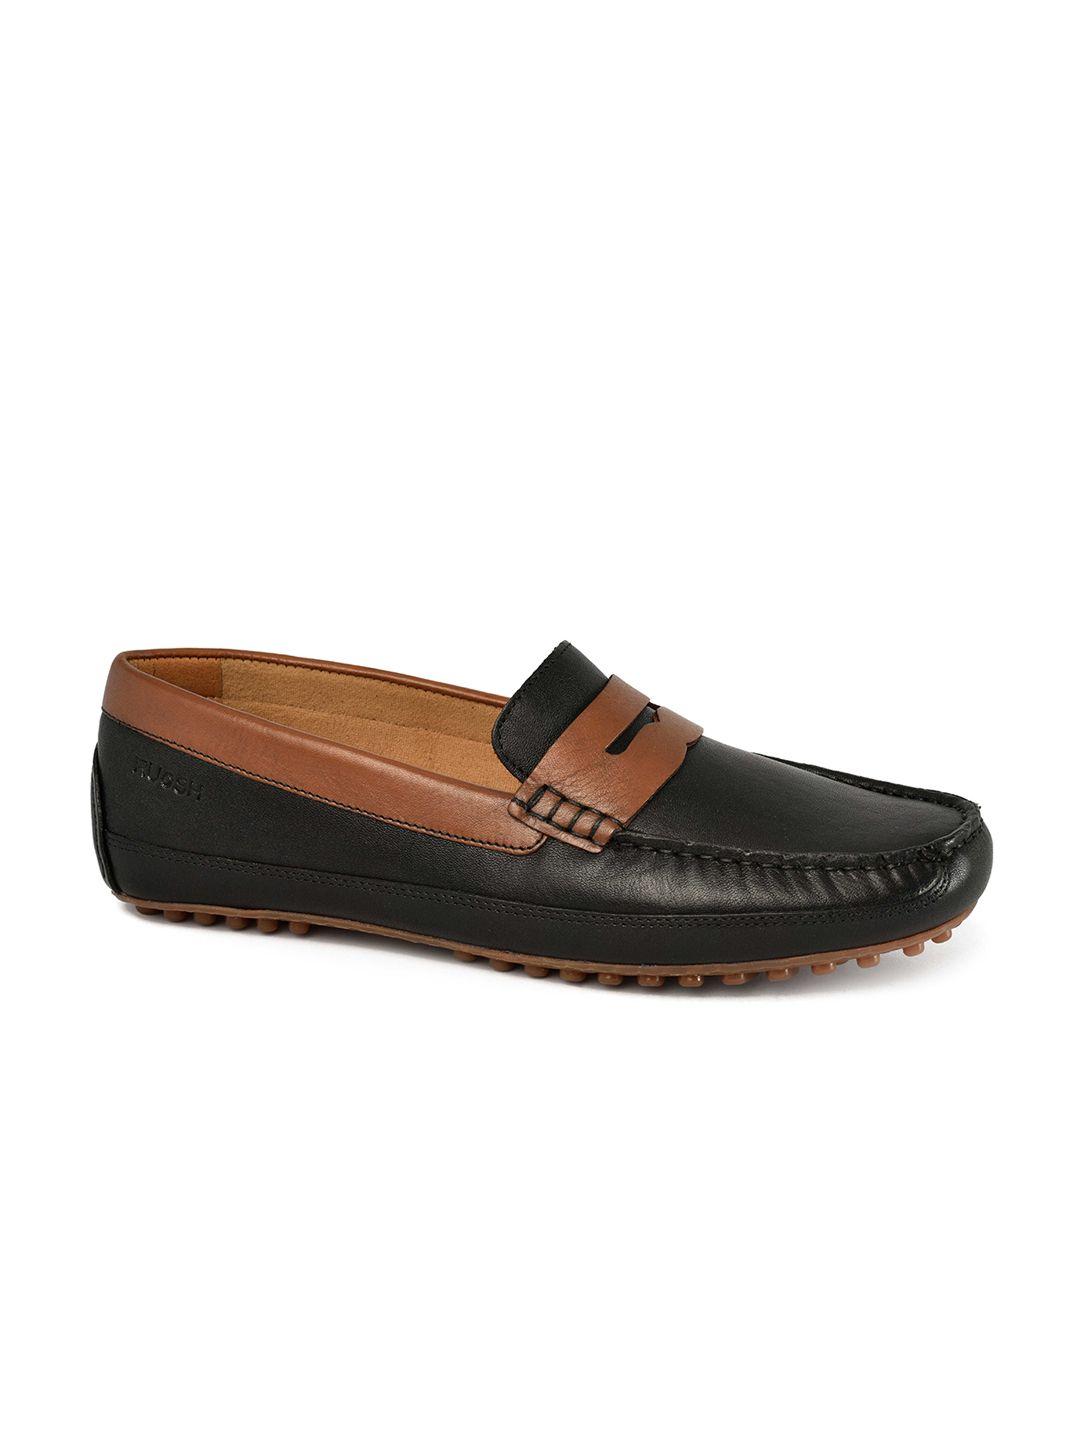 ruosh men comfort insole penny loafers